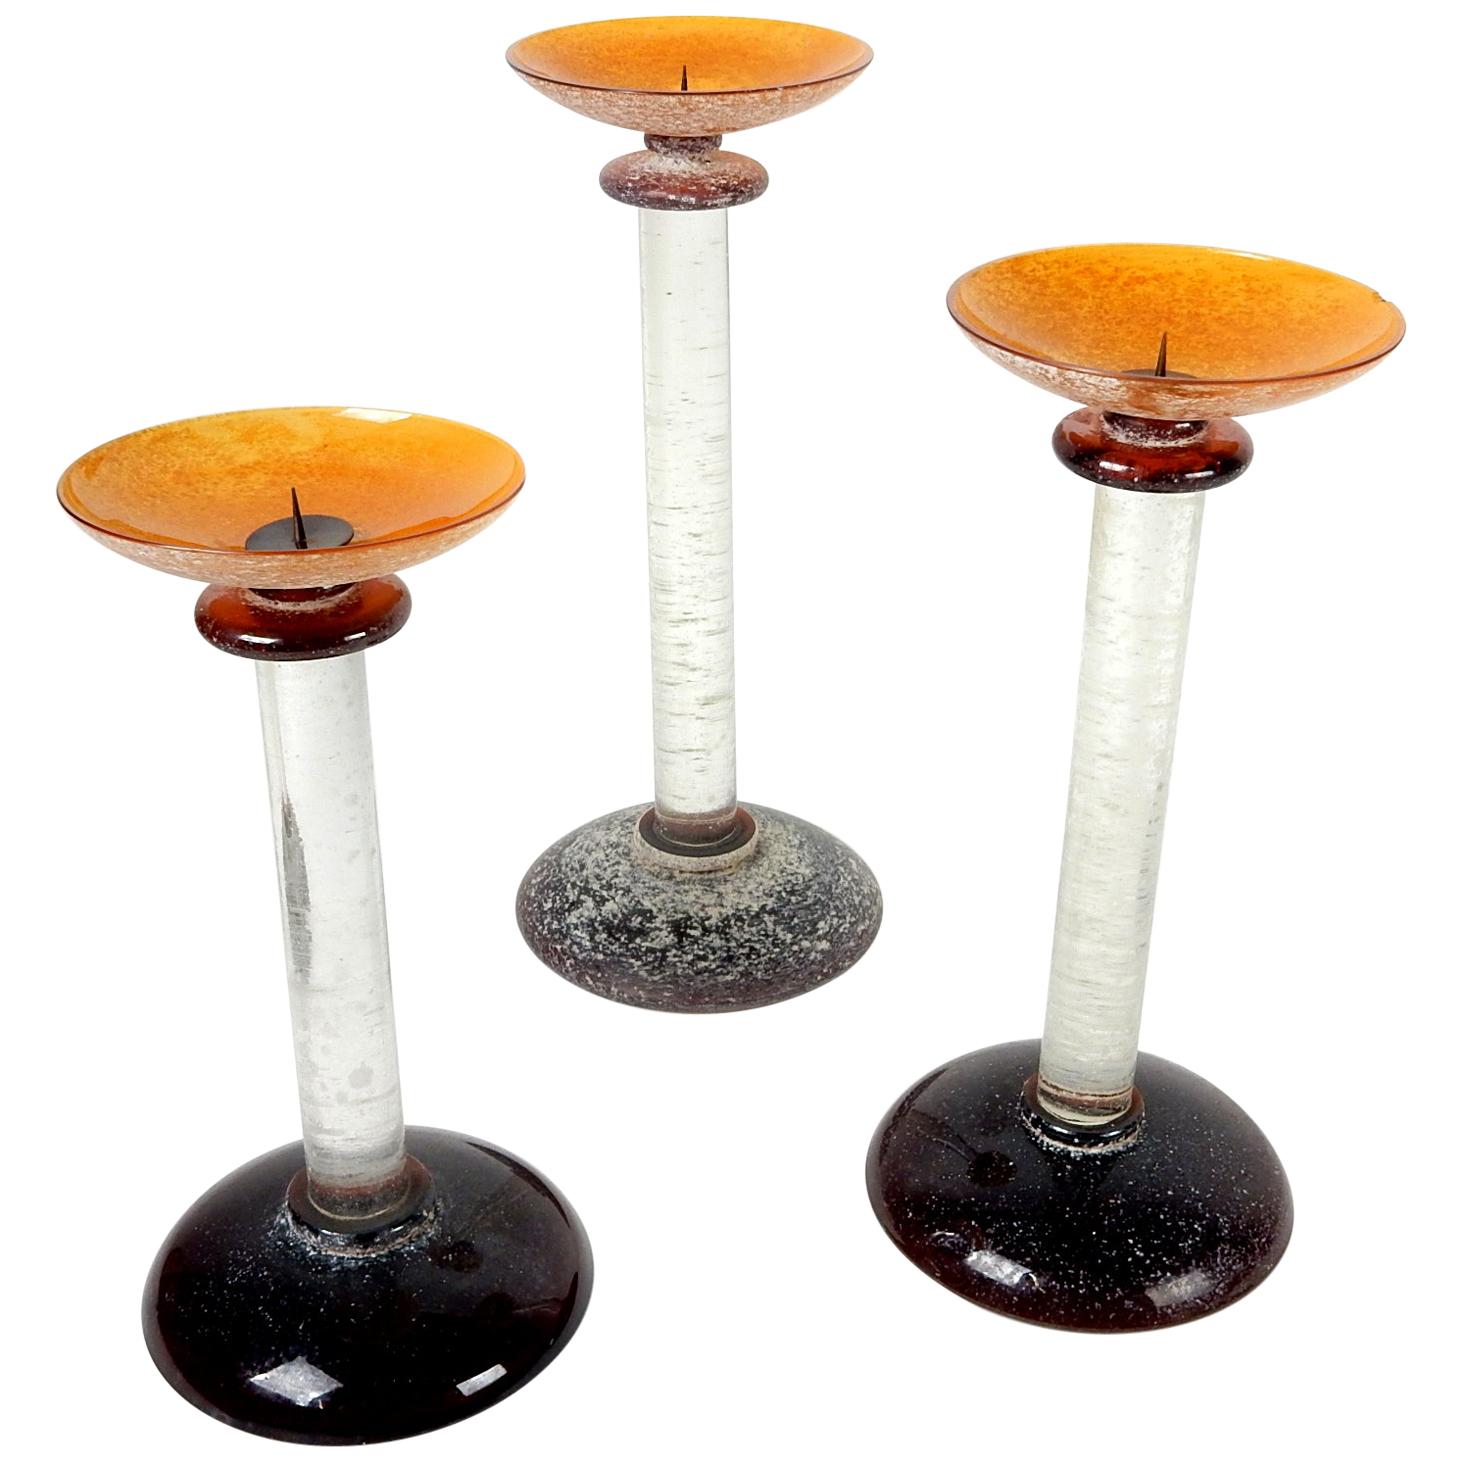 Rare set of 3 Murano Italy Scavo art glass candlestick pillars designed by Karl Springer.
Shortest is signed/etched 